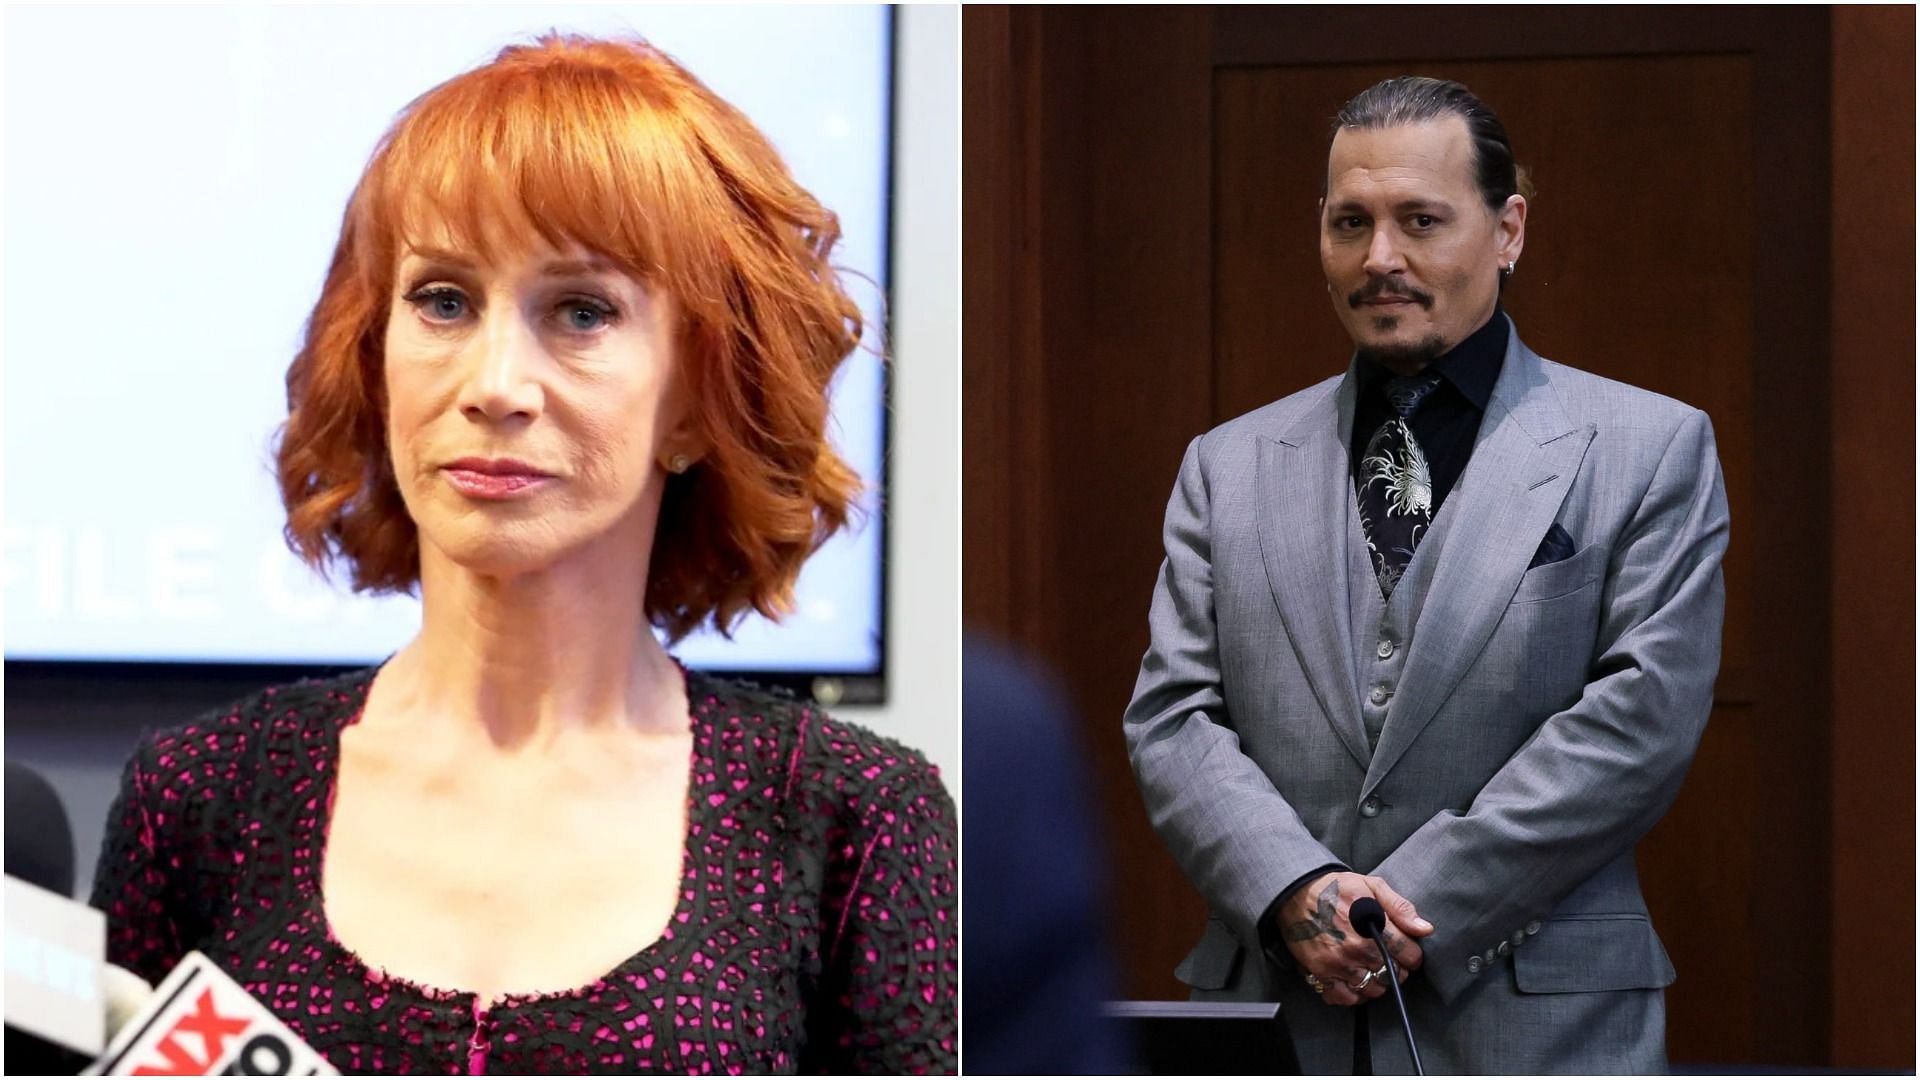 Kathy Griffin and Johnny Depp (Image via Frederick M. Brown/Getty Images, and Evelyn Hockstein/Pool/AFP/Getty Images)